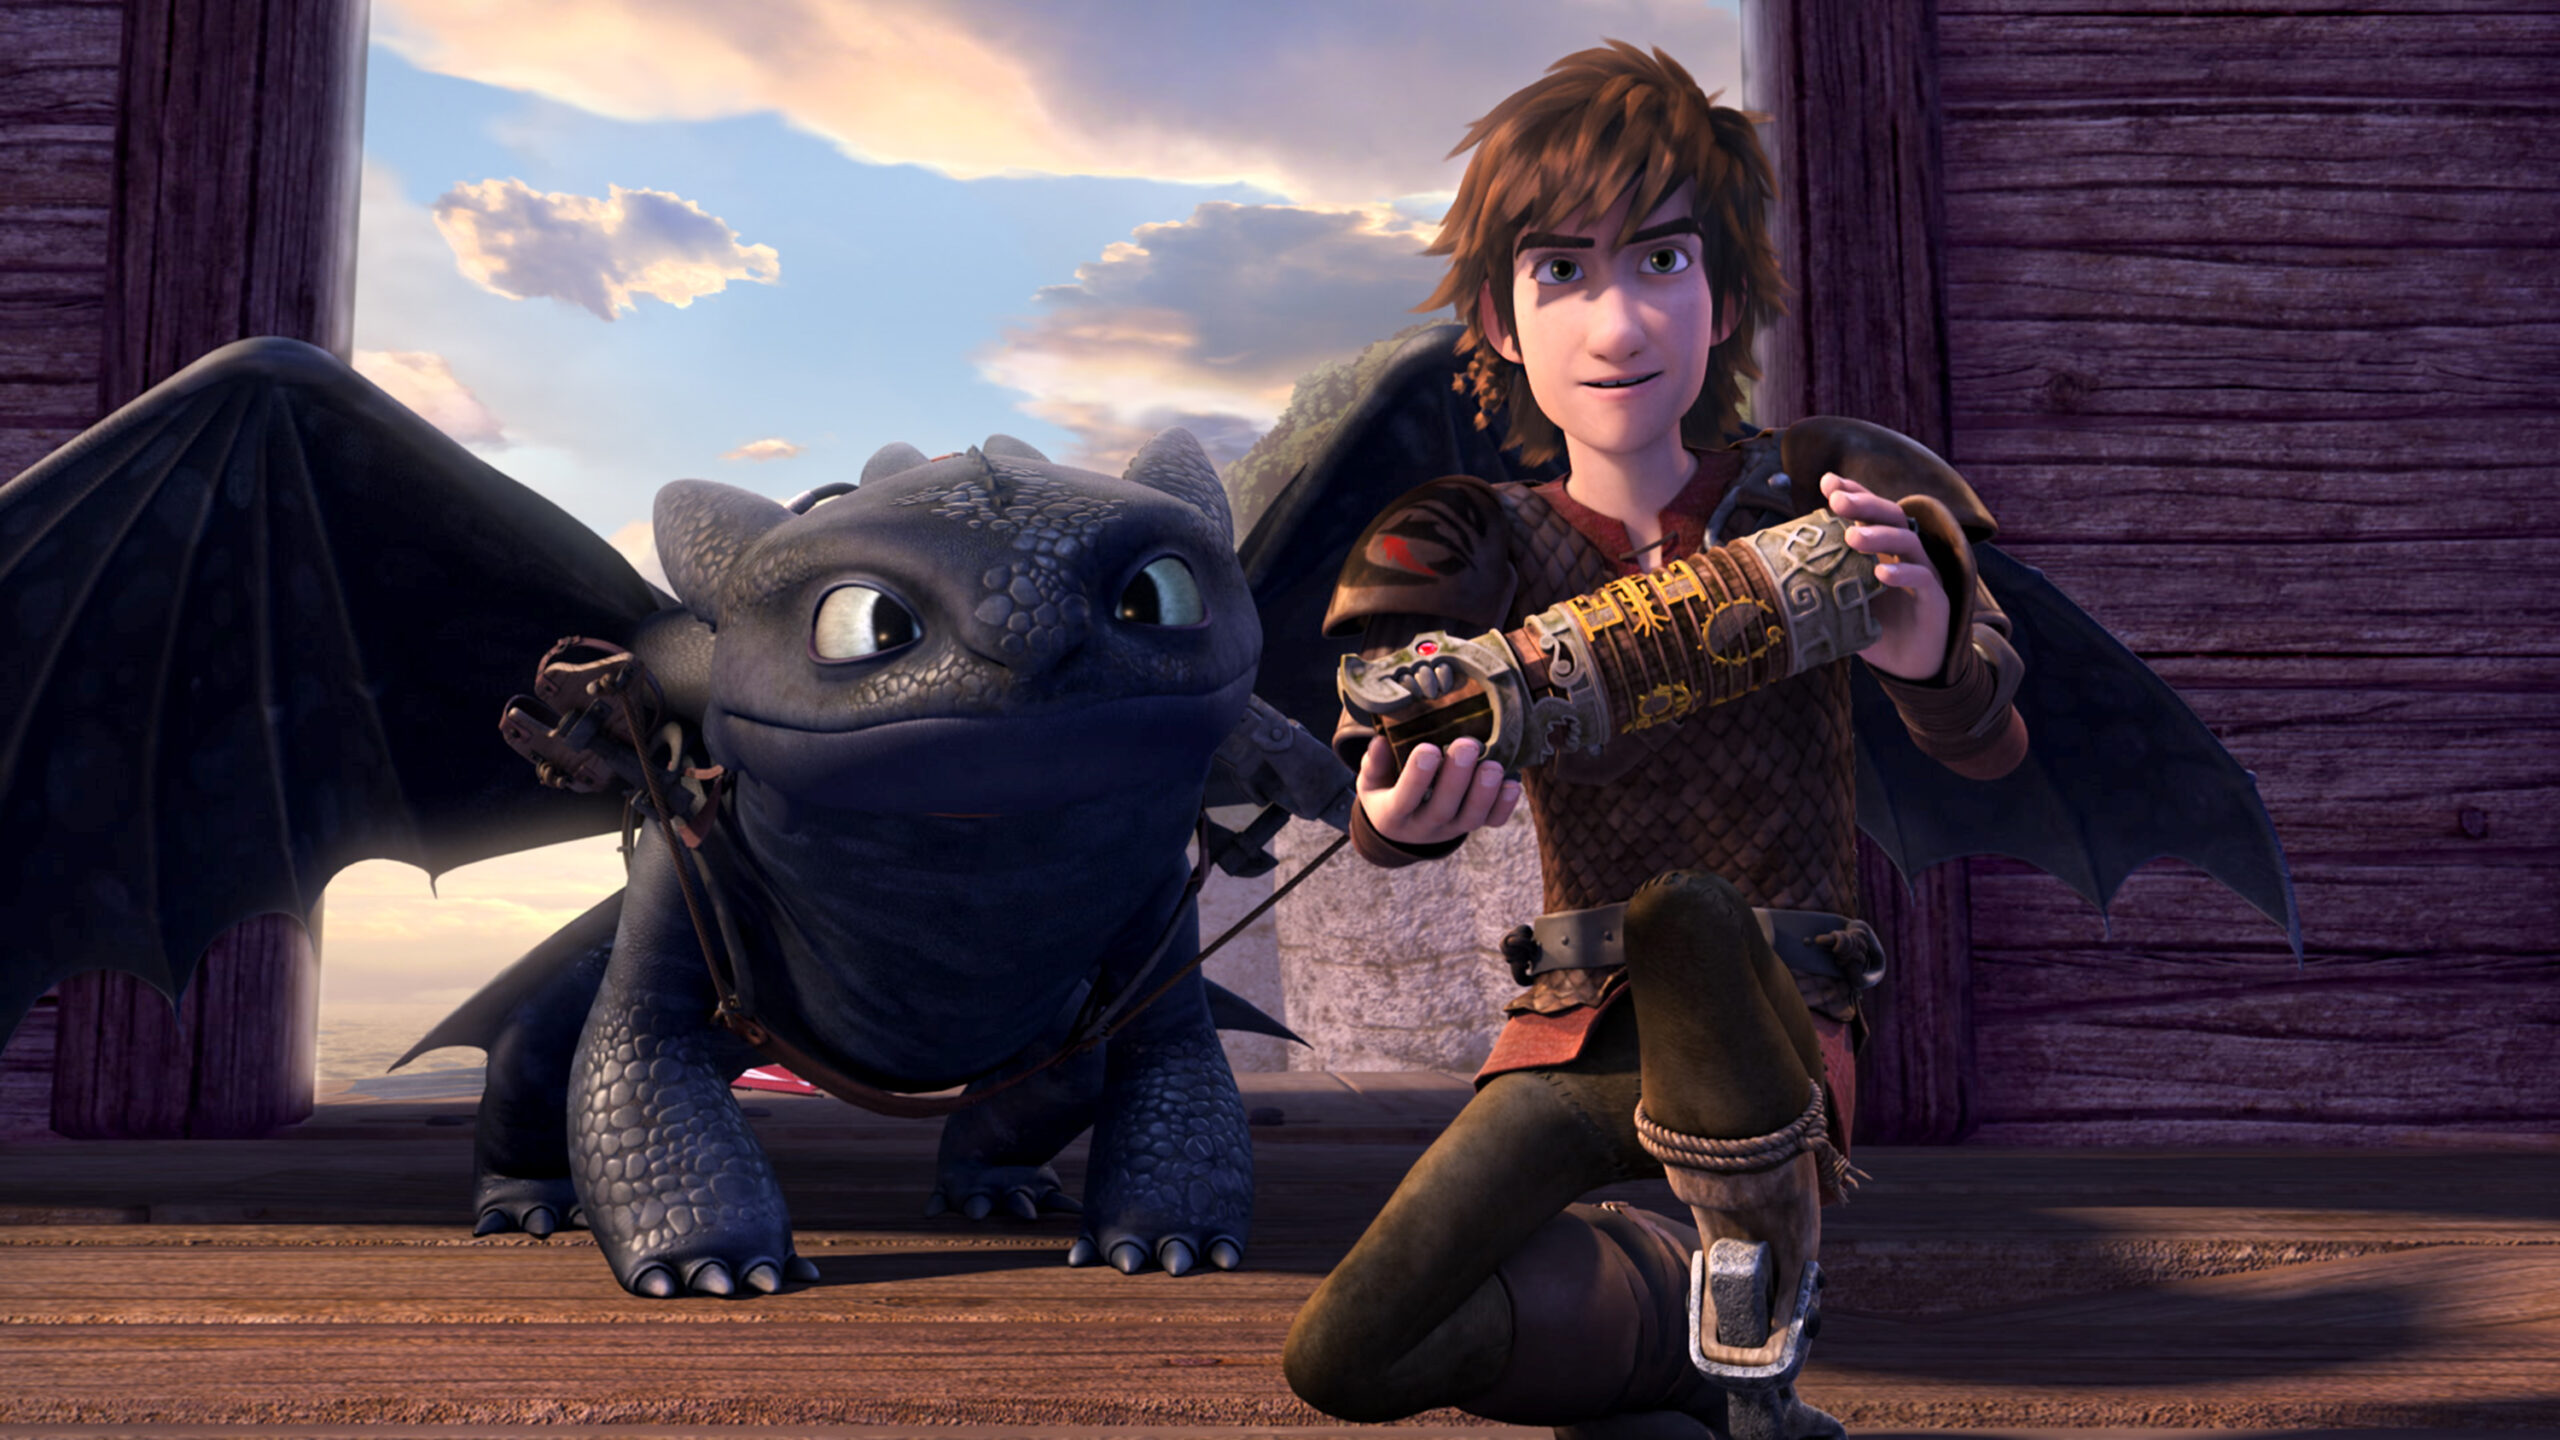 Live-Action 'How To Train Your Dragon' Race Swaps Astrid With Thandiwe  Newton's Daughter Nico Parker - Bounding Into Comics